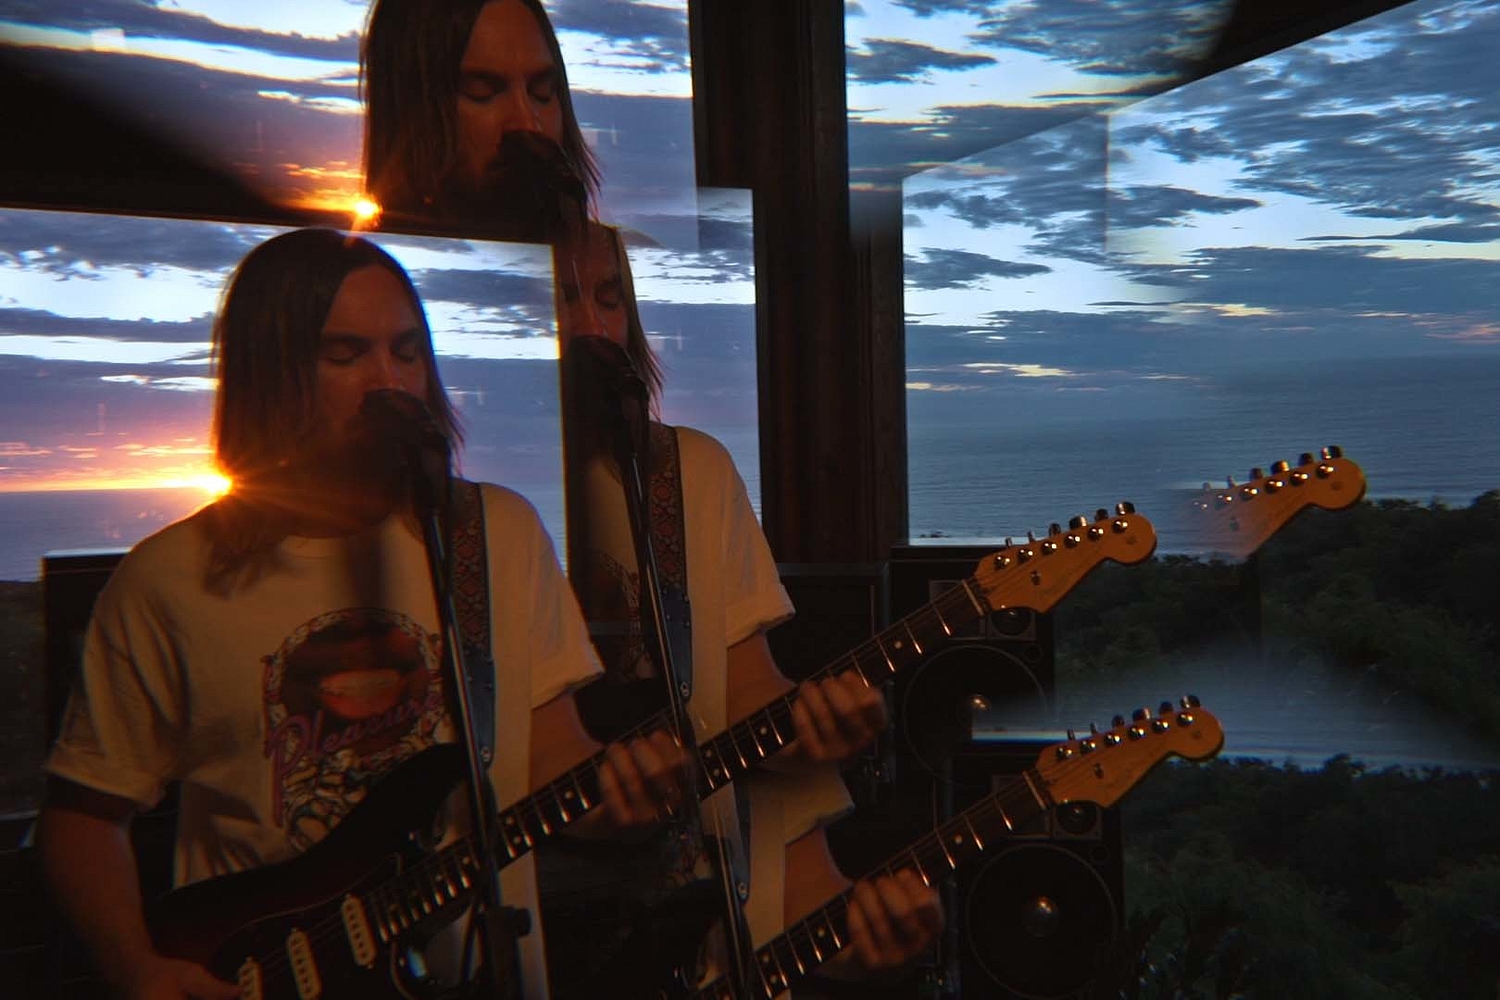 Tame Impala celebrate ‘Innerspeaker' with Wave House live stream